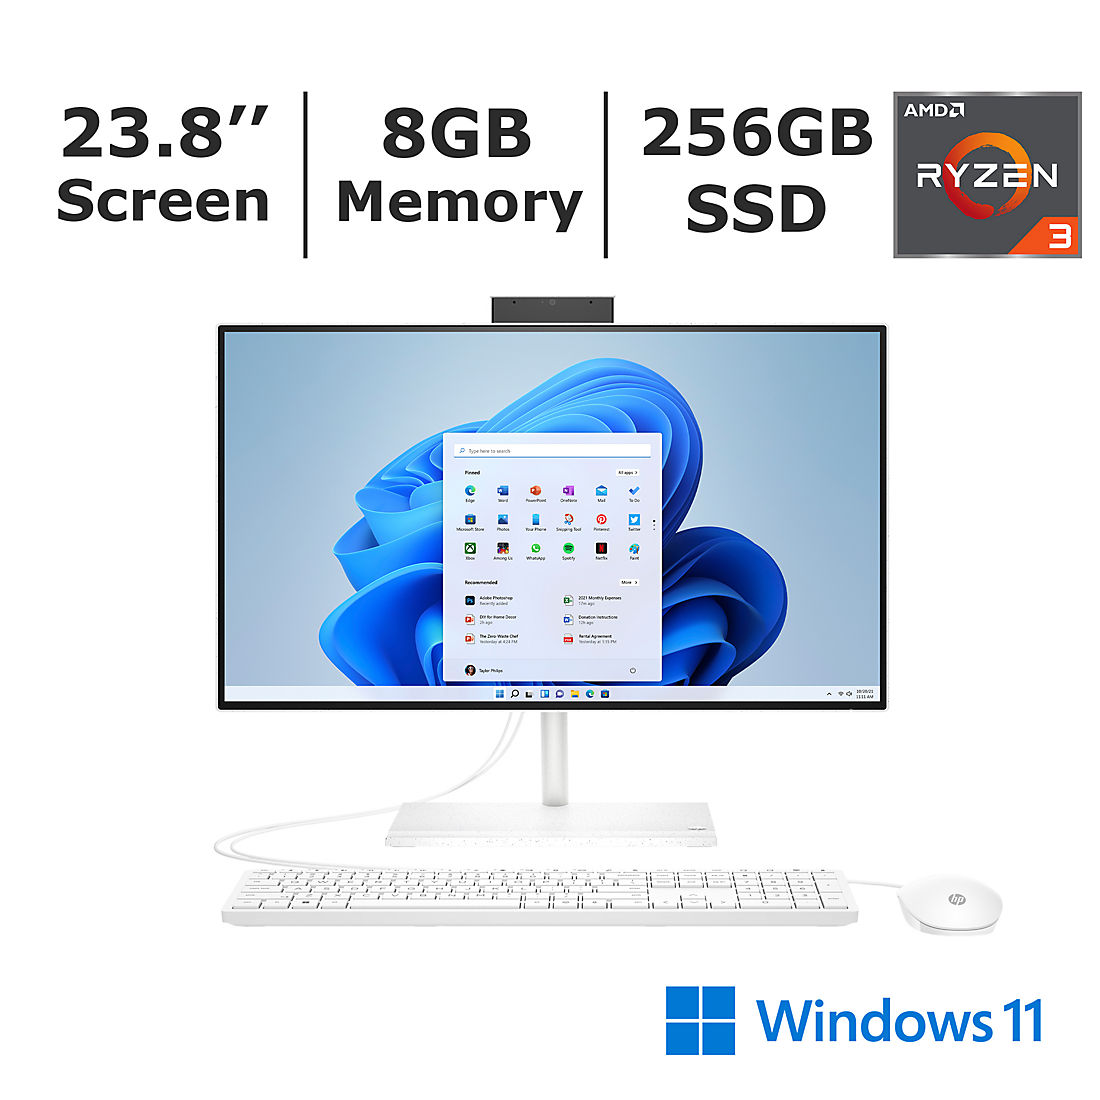 HP AiO PC 24CB1021 All-in-One Desktop | BJ's Wholesale Club